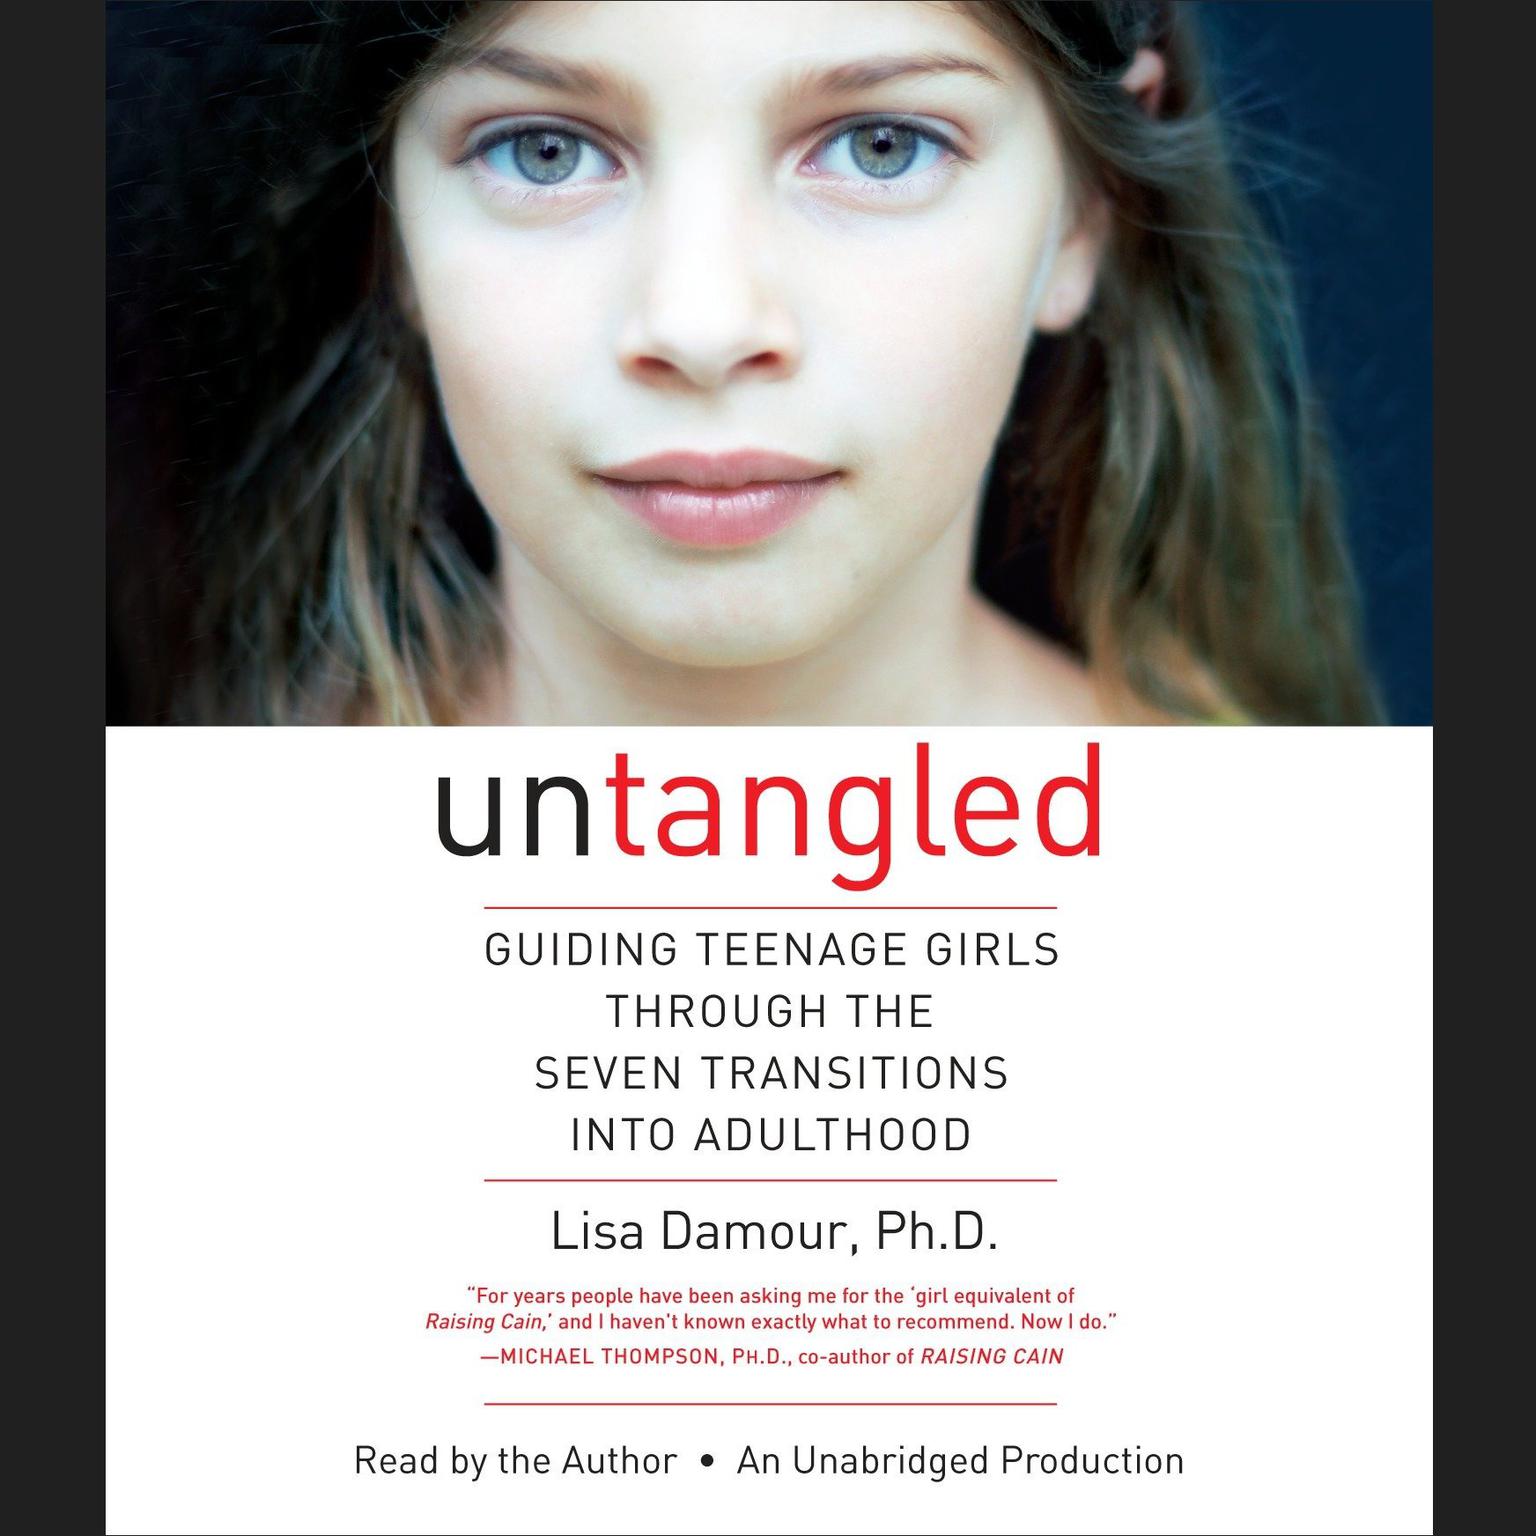 Untangled: Guiding Teenage Girls Through the Seven Transitions into Adulthood Audiobook, by Lisa Damour